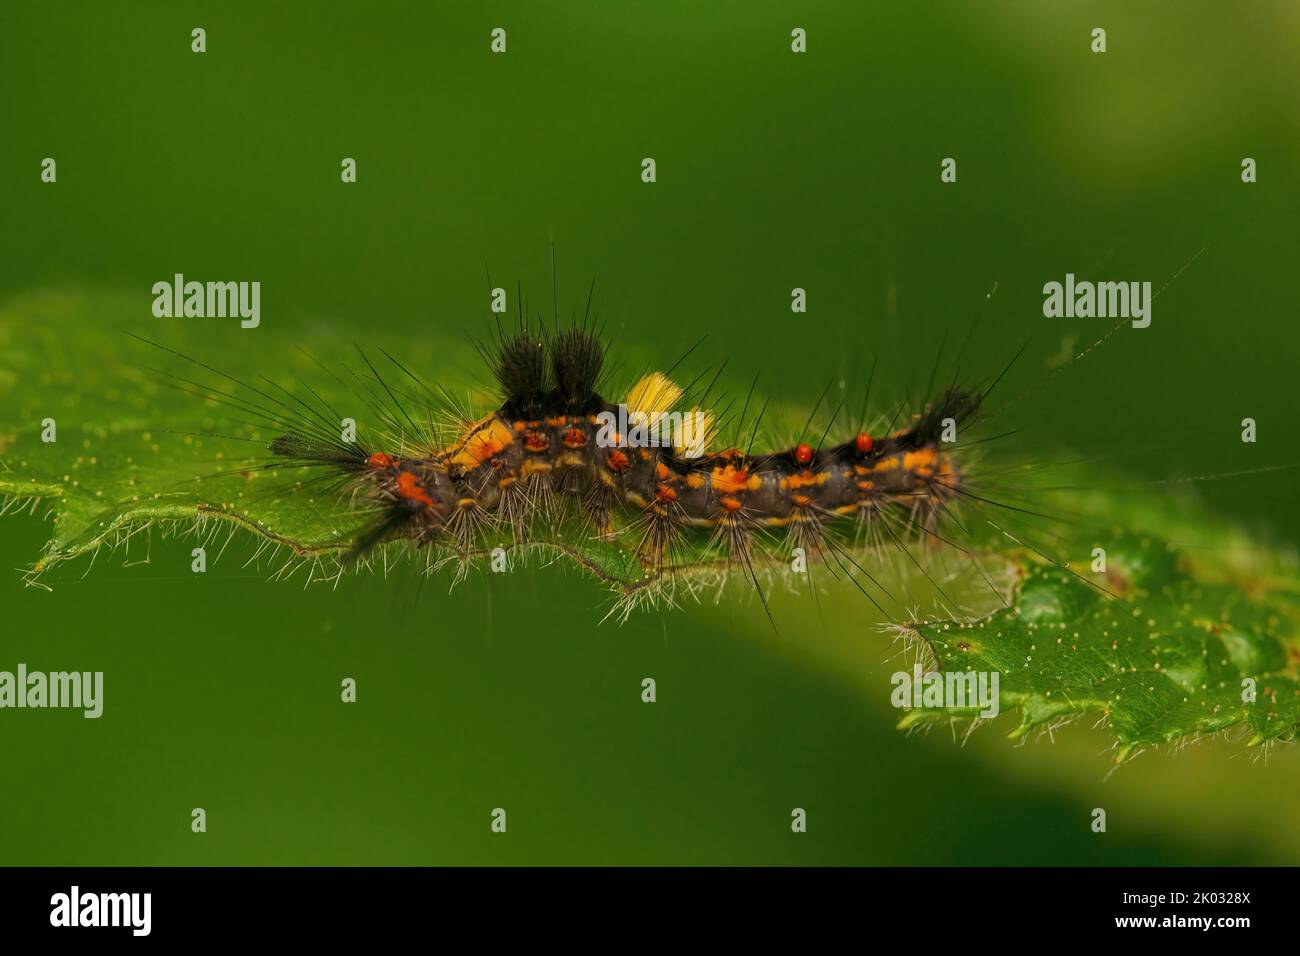 A macro shot of a Vapourer Caterpillar of Rusty tussock moth on a green leaf against blurred background Stock Photo